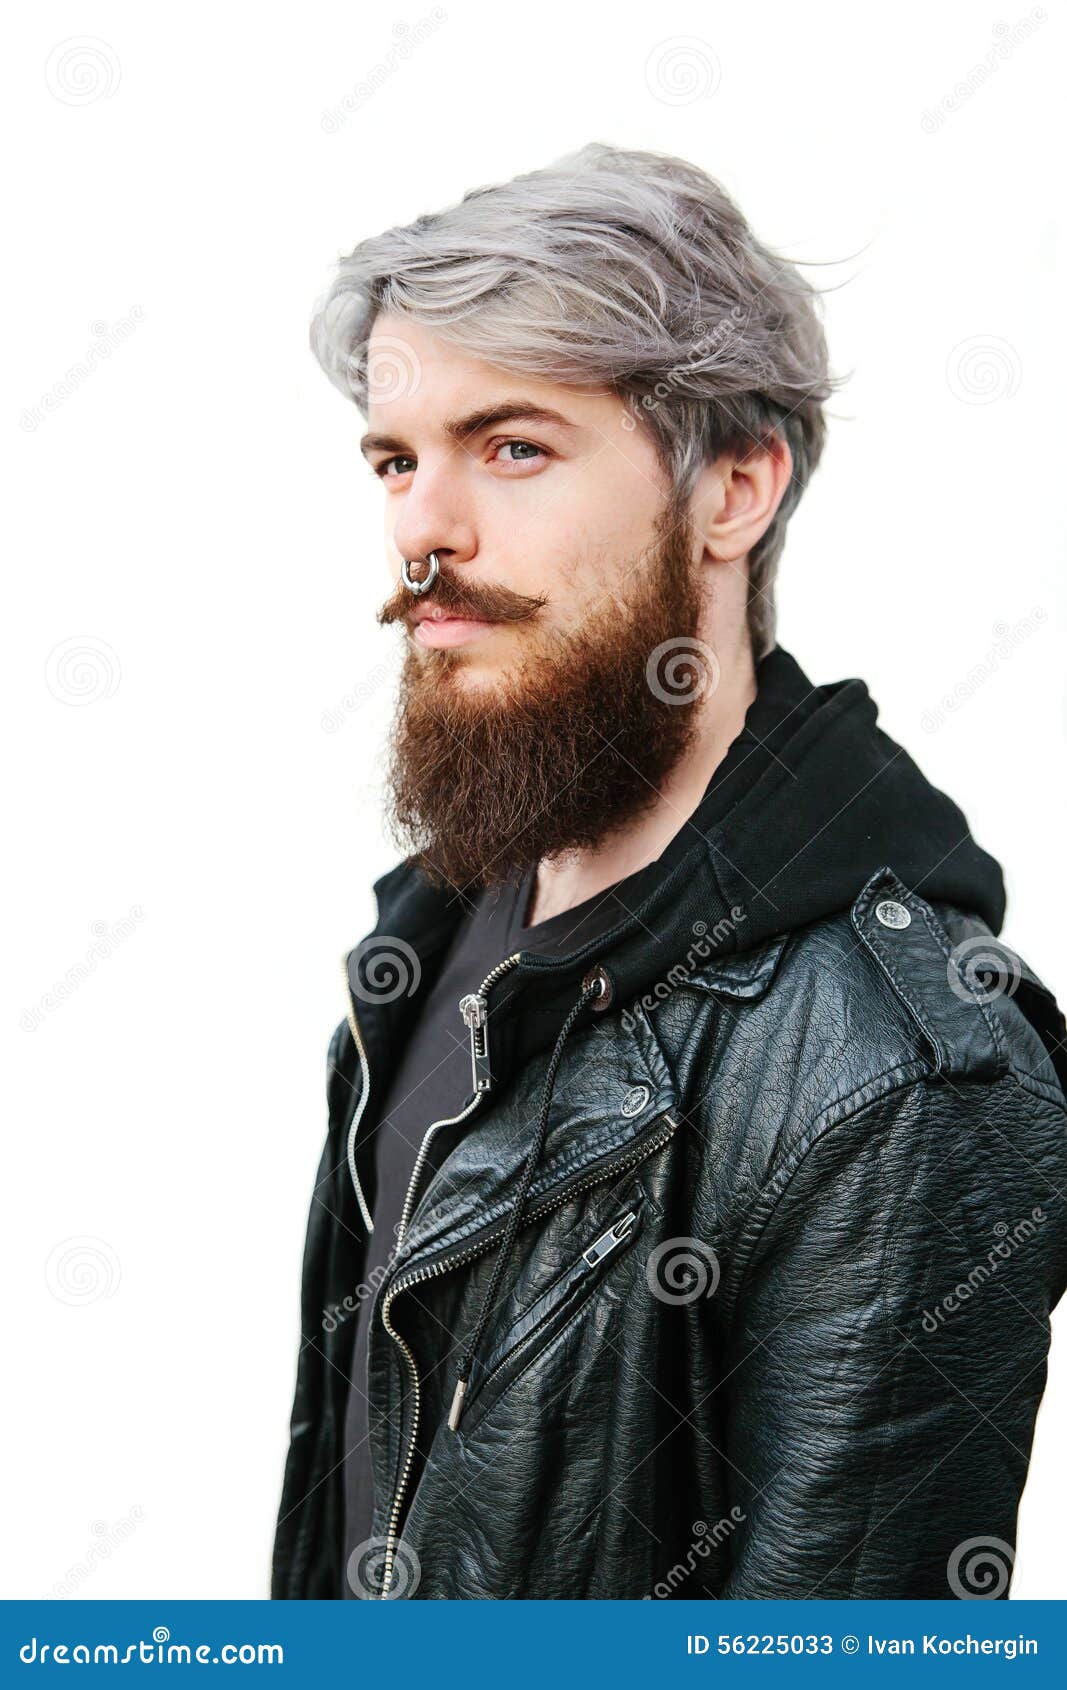 Bearded Hipster with Nose Ring in Leather Jacket Stock Image - Image of ...